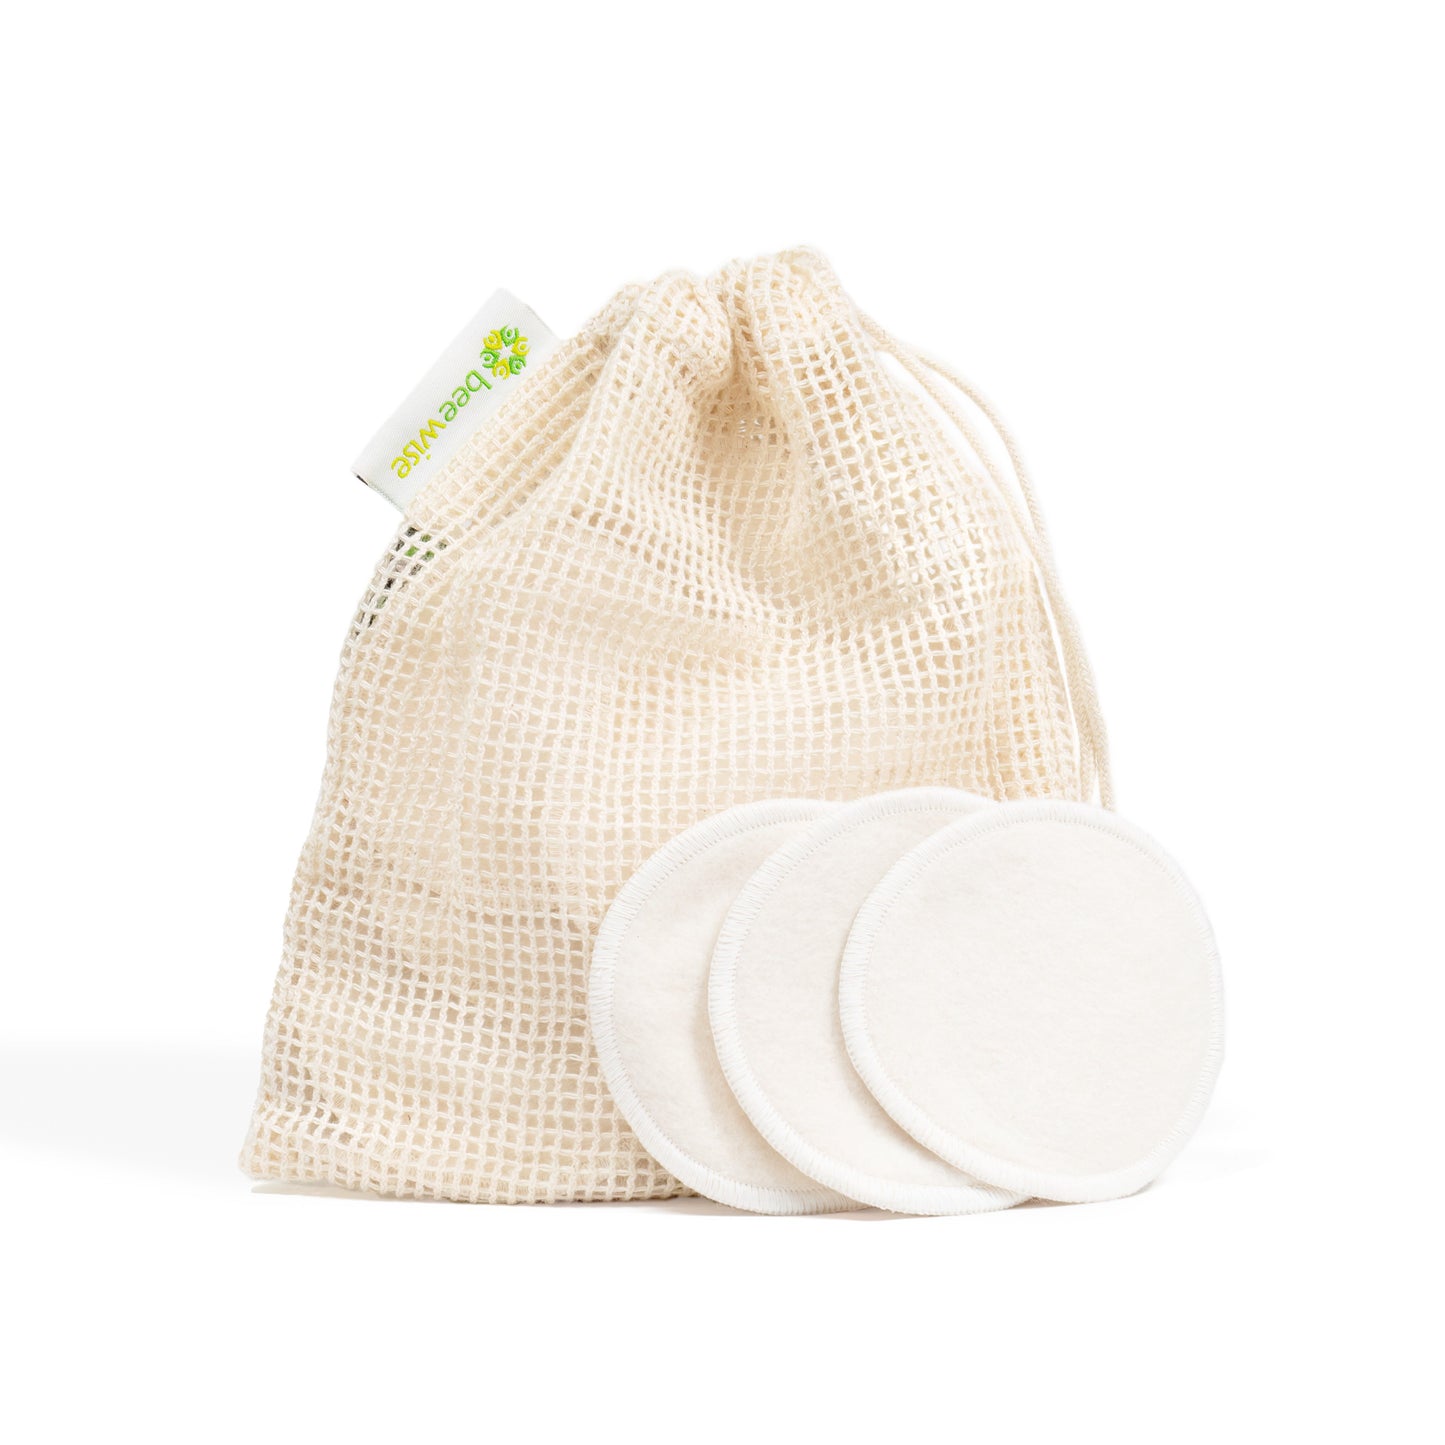 Reusable Makeup Remover Pads with mesh bag made in cotton